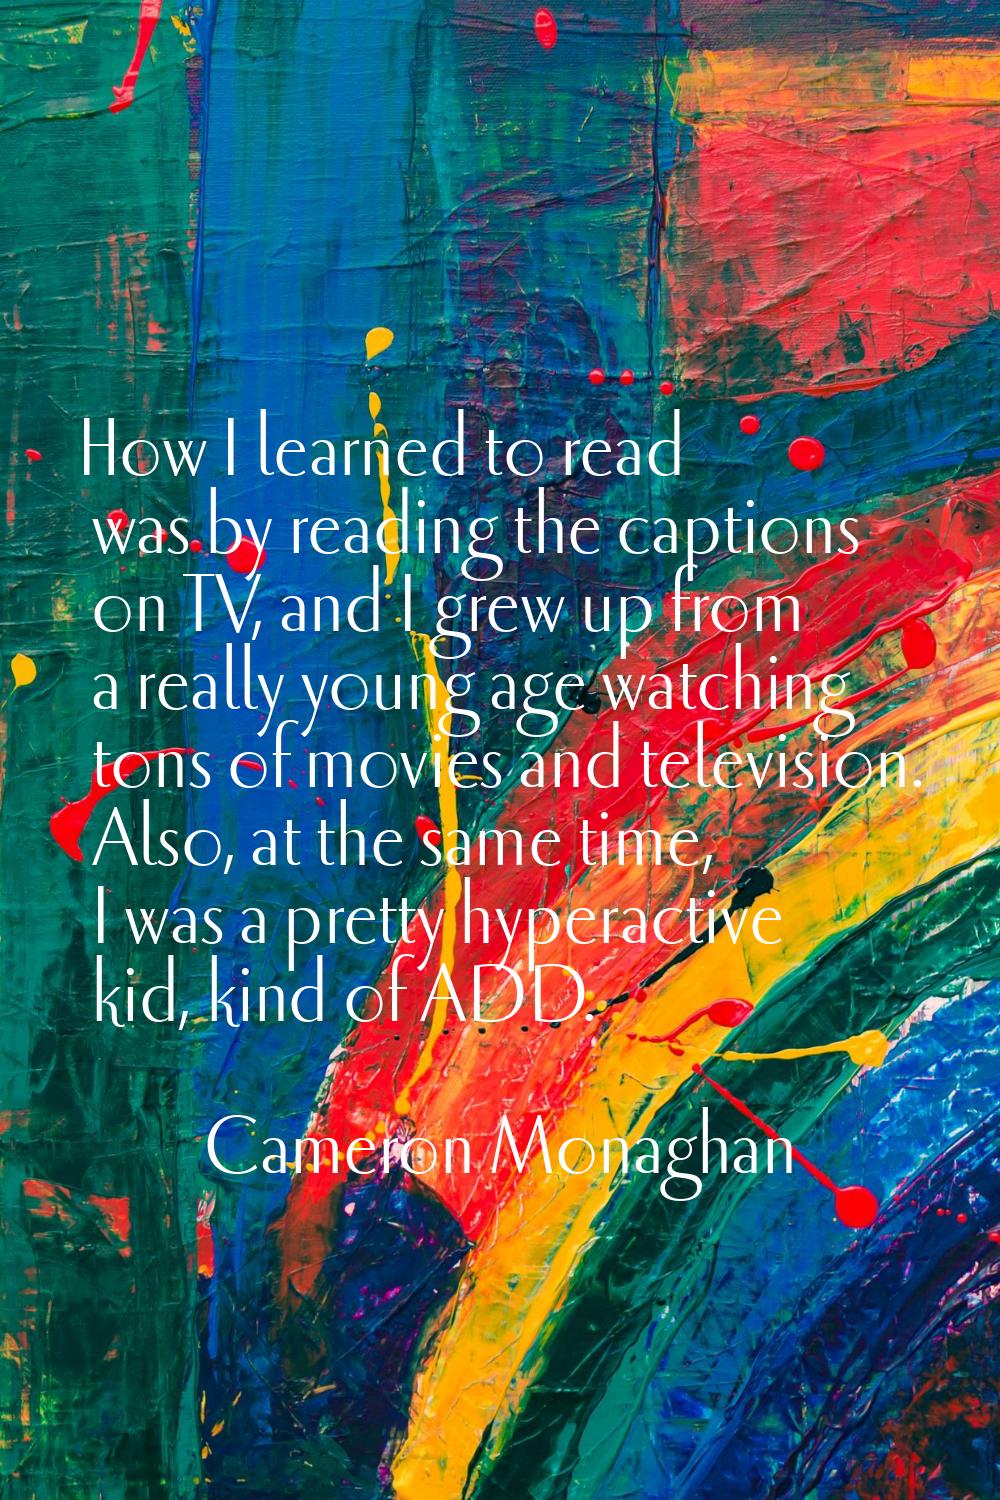 How I learned to read was by reading the captions on TV, and I grew up from a really young age watc